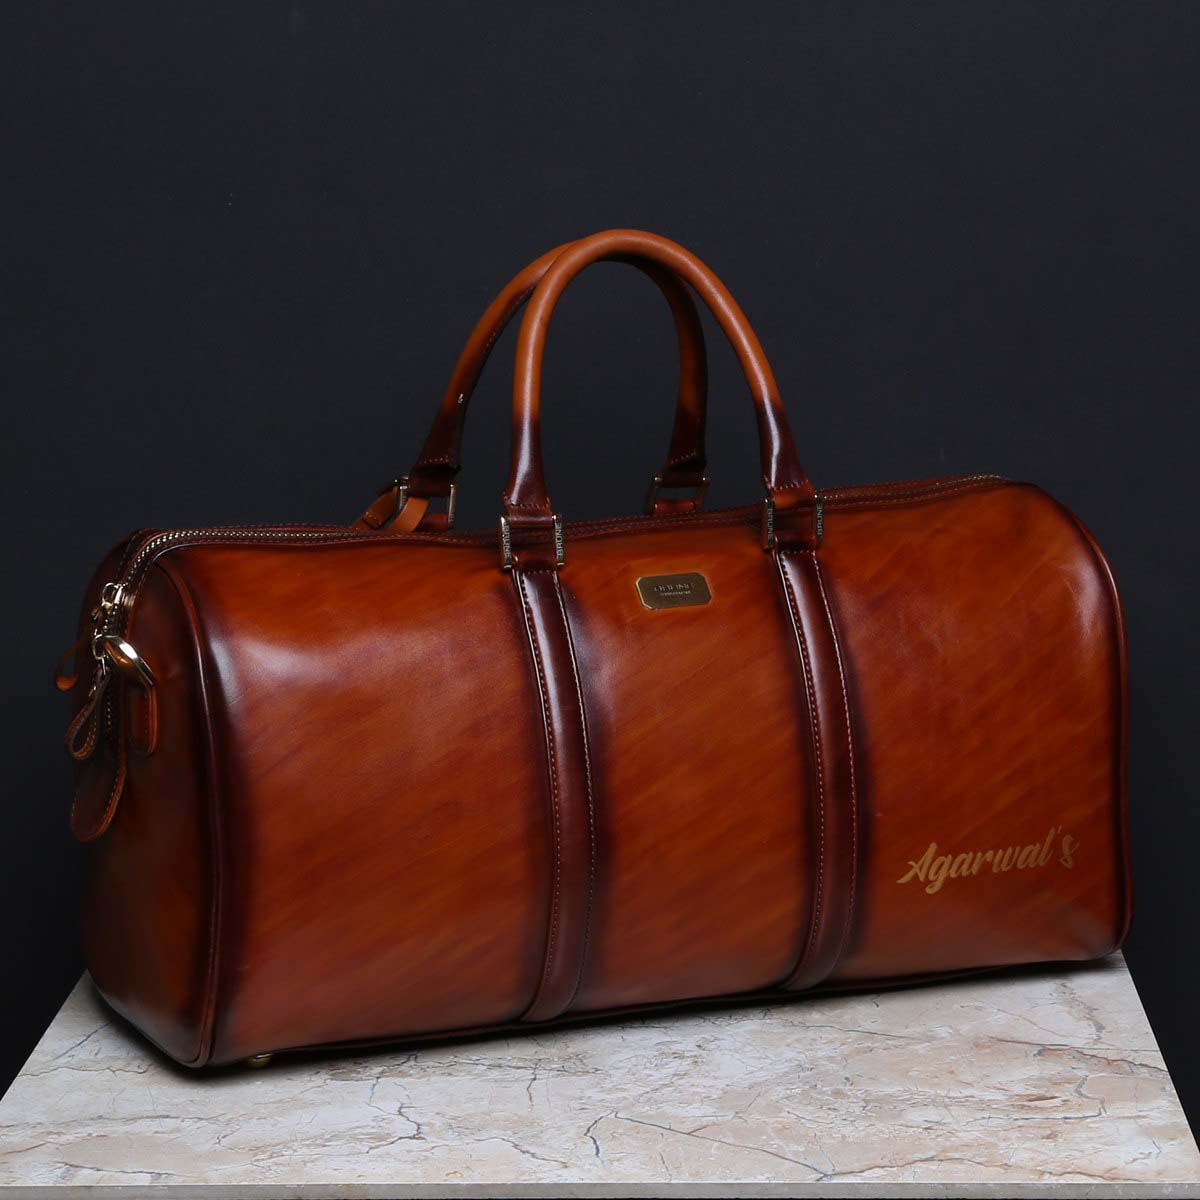 Crafted Tan Leather Duffle Bag with Name Initials AGARWAL'S by Brune & Bareskin